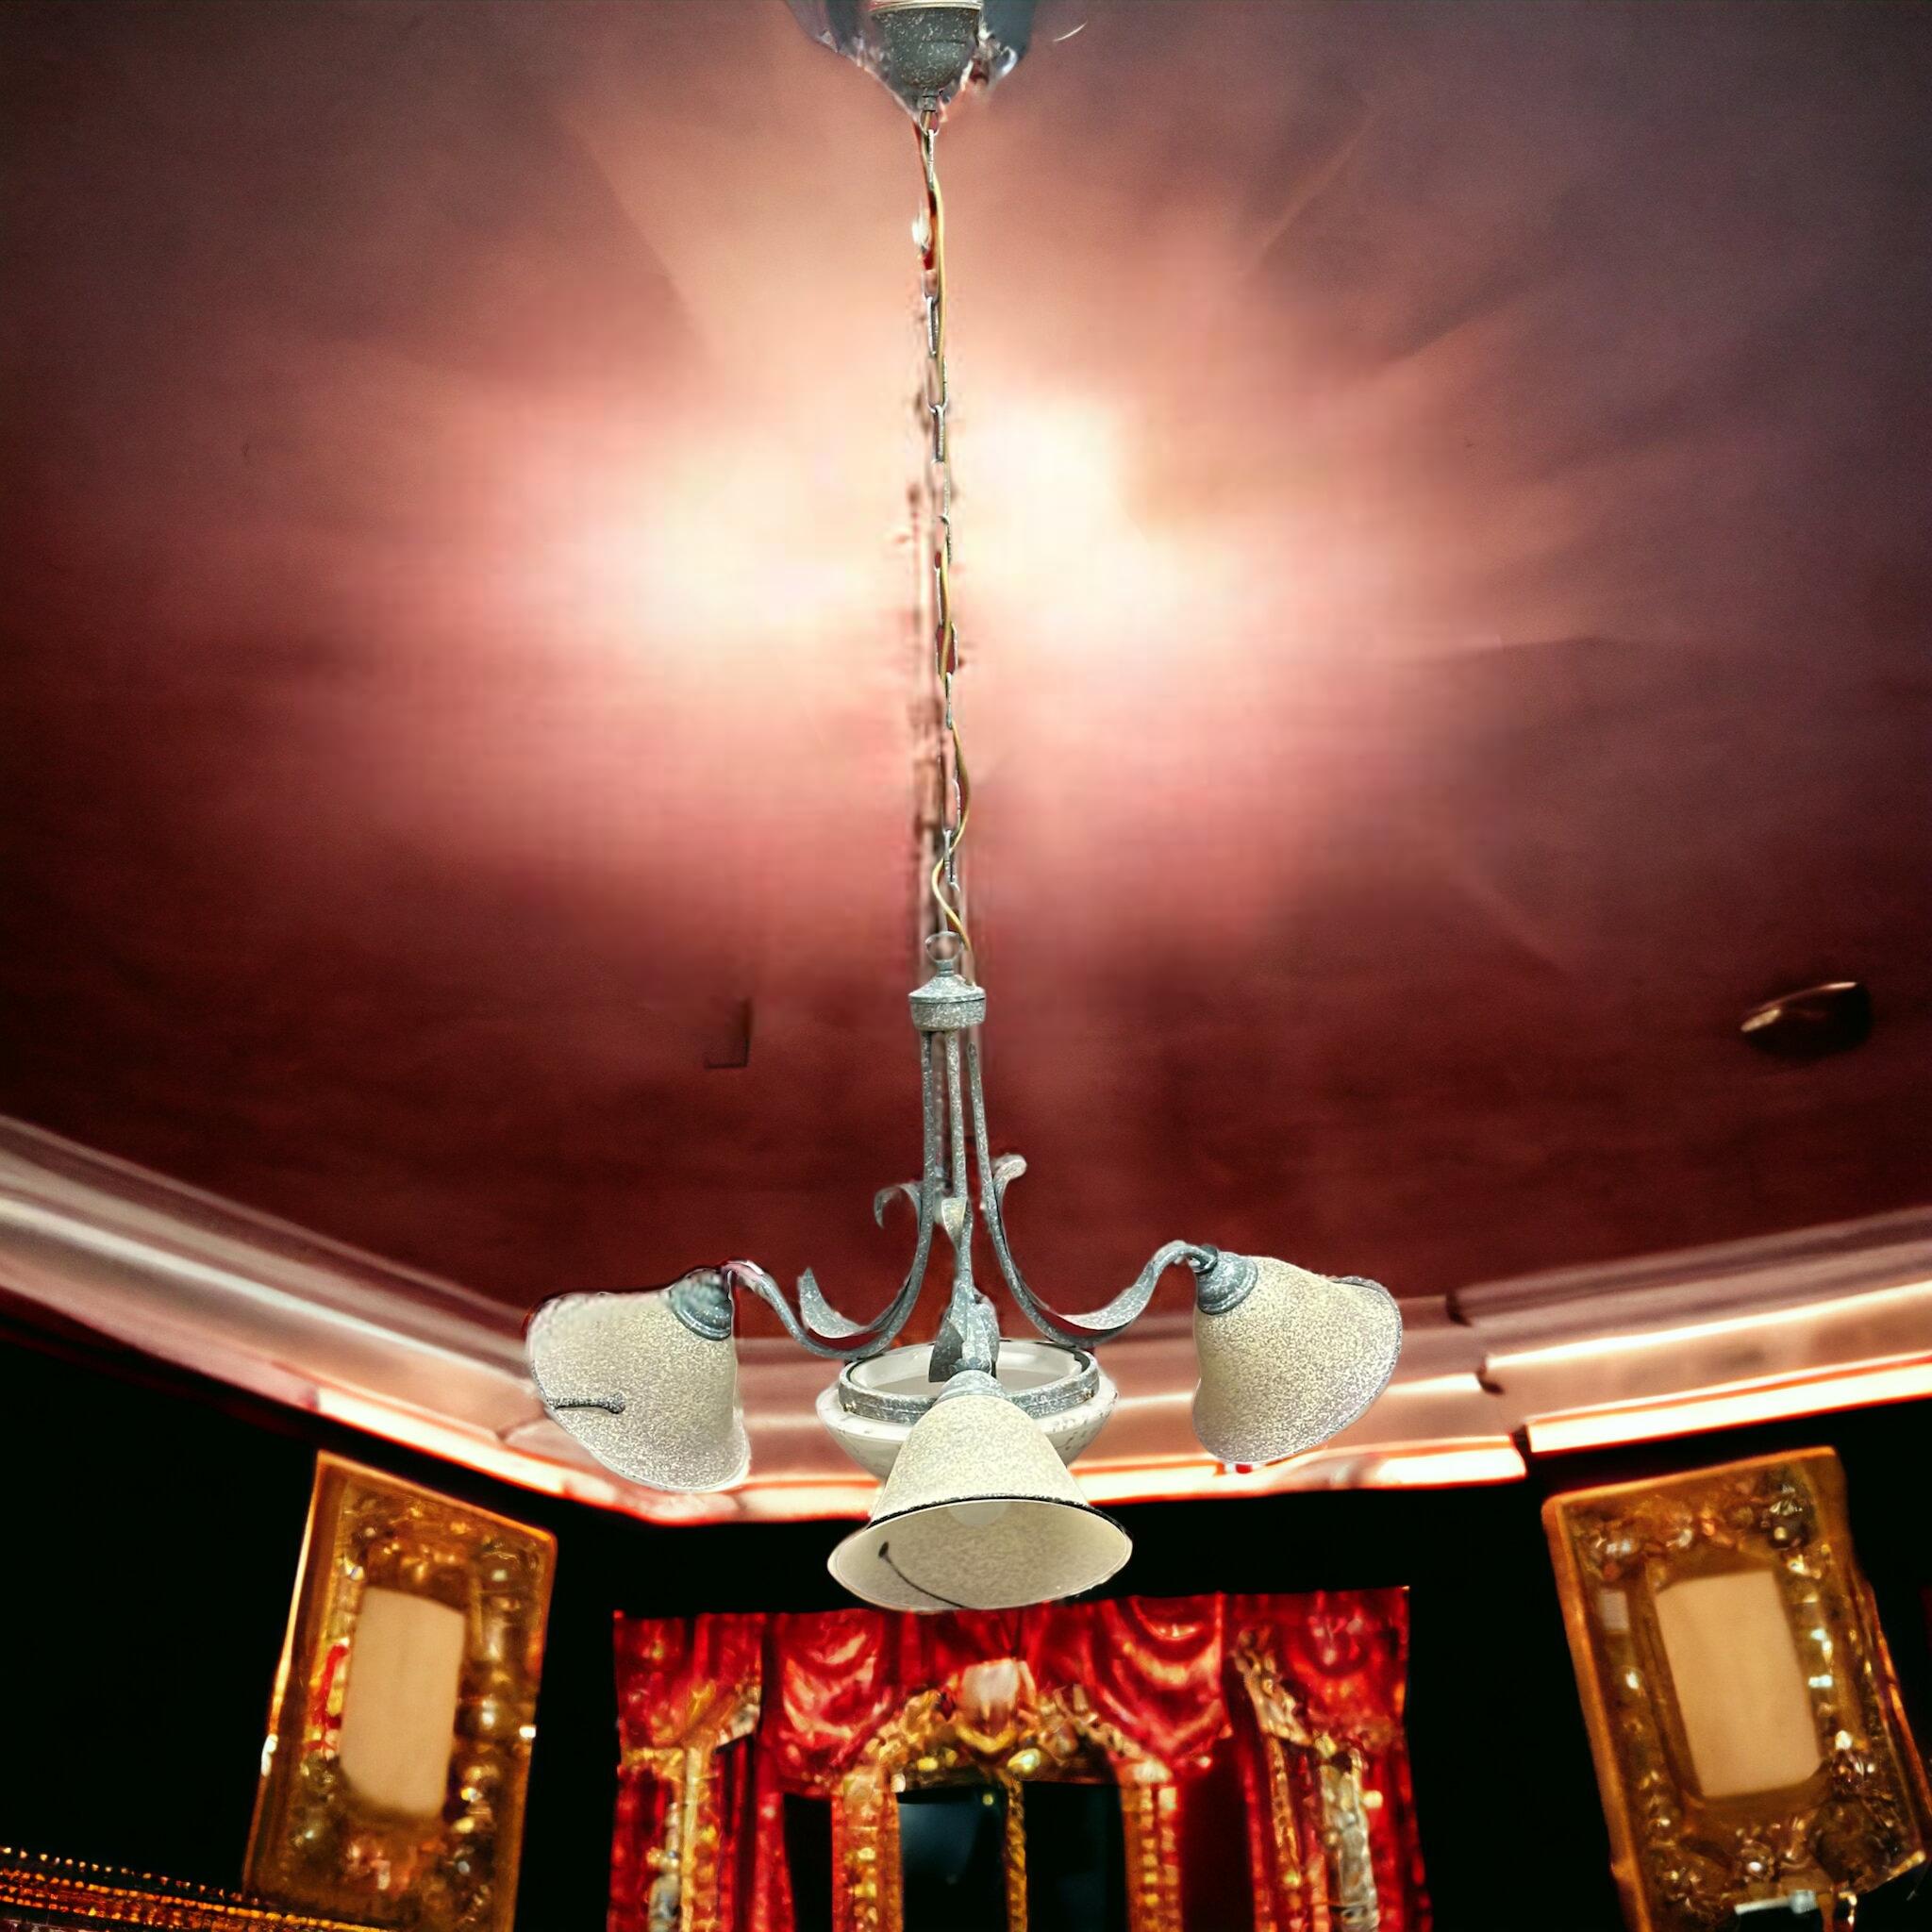 Petite Florentine style four-light chandelier. Functions as is with four E27 / 110 Volt light bulbs. Can take up to 60 Watts each bulb. Beautiful metal three arm chandelier with 3 glass shades for 3 light bulbs and a glass bowl in the middle with